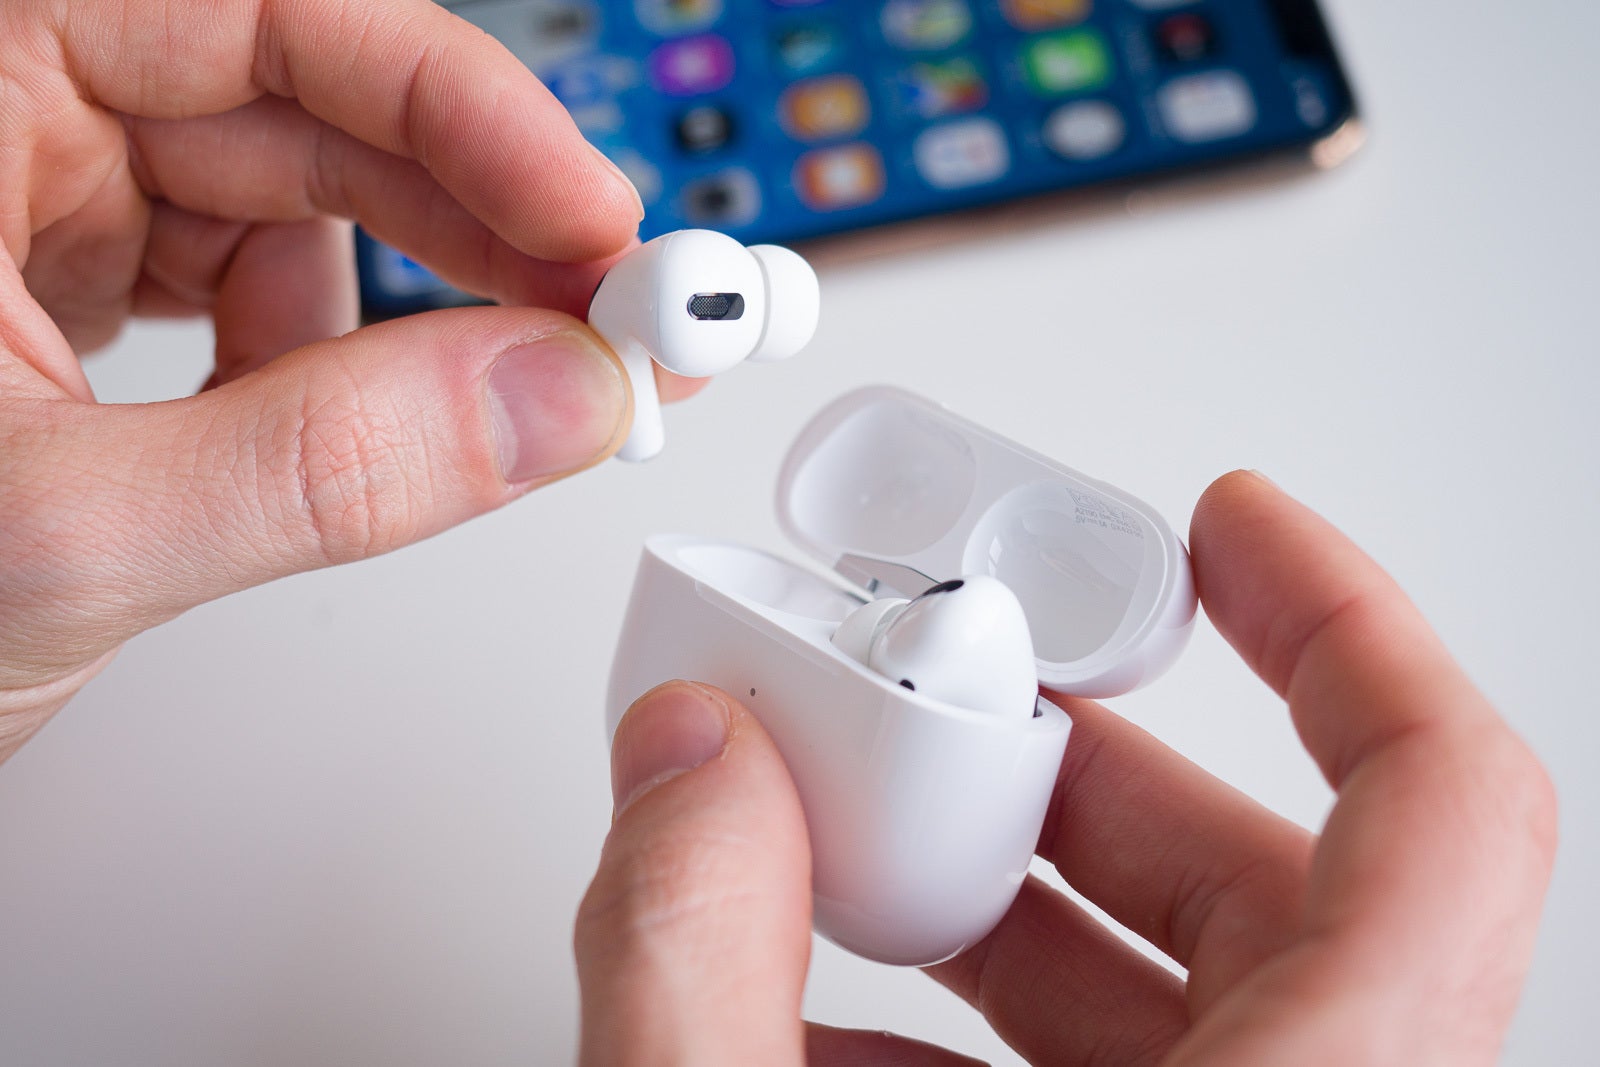 AirPods Pro will inspire the new AirPods design"&nbsp - Apple to launch redesigned AirPods 3 & AirPods Pro 2 in 2021, new HomePod too